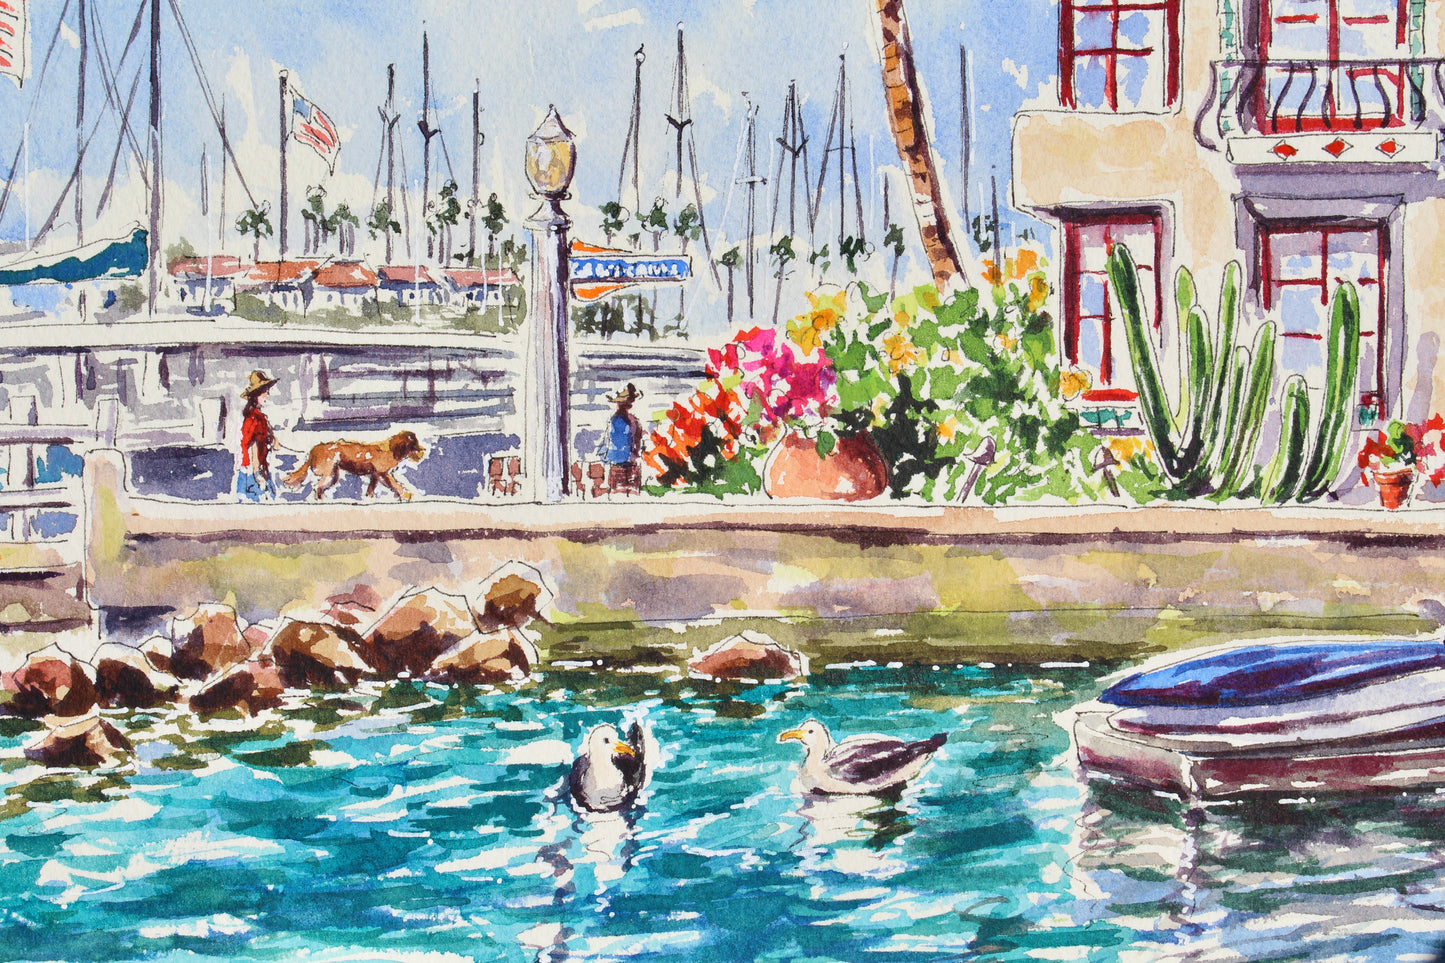 Exploring Balboa Island, An Original 10" x 14" Watercolor And Ink Painting Of Balboa Island With Golden Retrievers And Casa Revilo On South Bayfront